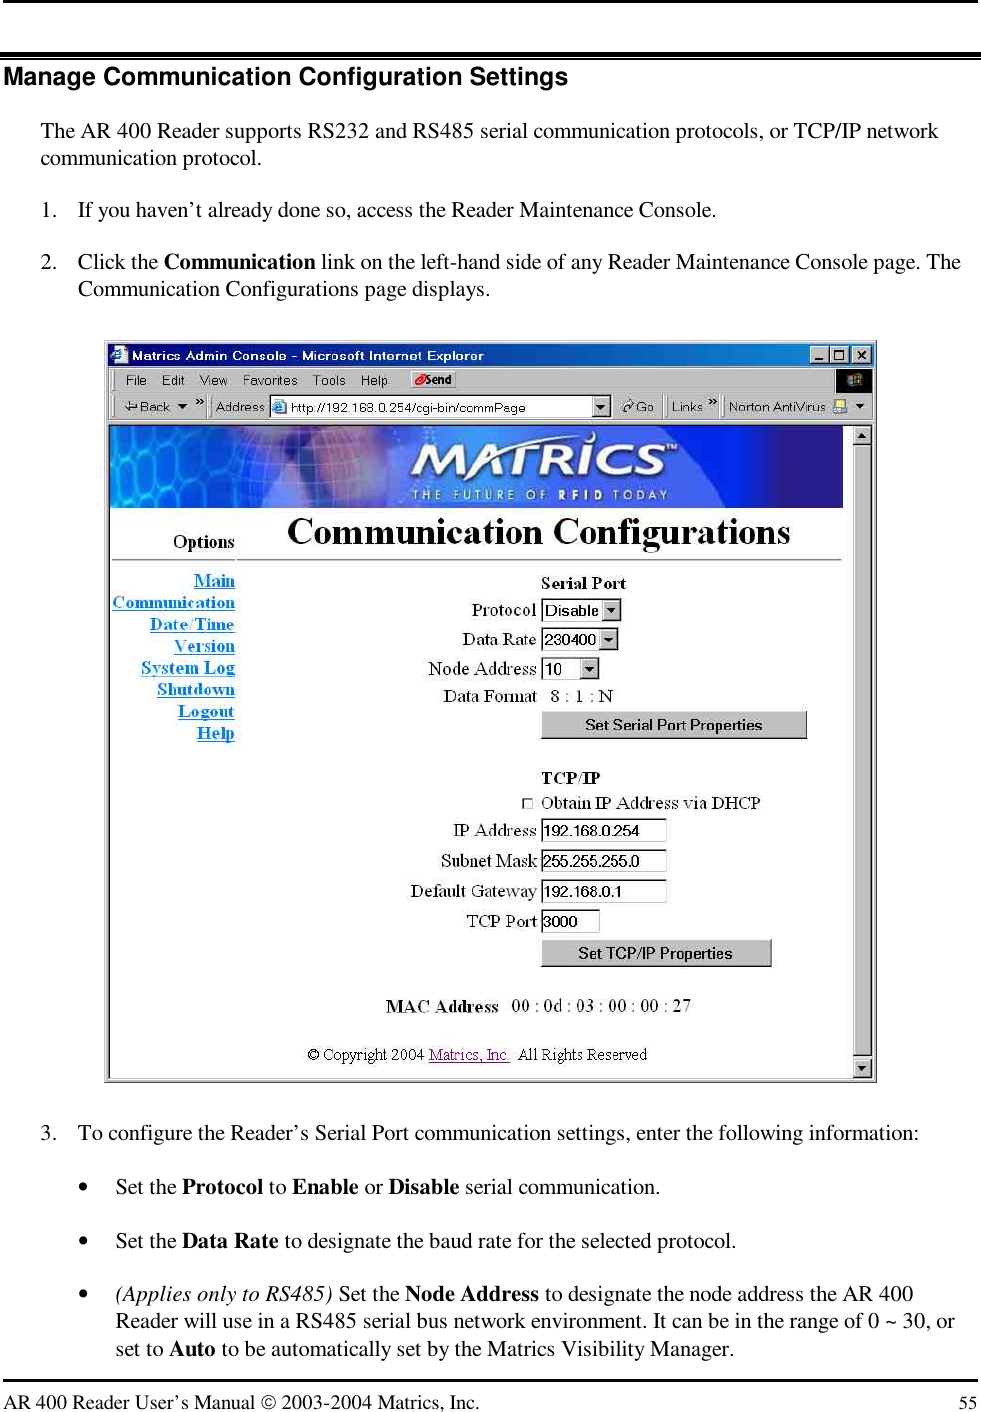   AR 400 Reader User’s Manual  2003-2004 Matrics, Inc.  55 Manage Communication Configuration Settings The AR 400 Reader supports RS232 and RS485 serial communication protocols, or TCP/IP network communication protocol.  1.  If you haven’t already done so, access the Reader Maintenance Console. 2. Click the Communication link on the left-hand side of any Reader Maintenance Console page. The Communication Configurations page displays.  3.  To configure the Reader’s Serial Port communication settings, enter the following information: •  Set the Protocol to Enable or Disable serial communication. •  Set the Data Rate to designate the baud rate for the selected protocol. •  (Applies only to RS485) Set the Node Address to designate the node address the AR 400 Reader will use in a RS485 serial bus network environment. It can be in the range of 0 ~ 30, or set to Auto to be automatically set by the Matrics Visibility Manager. 